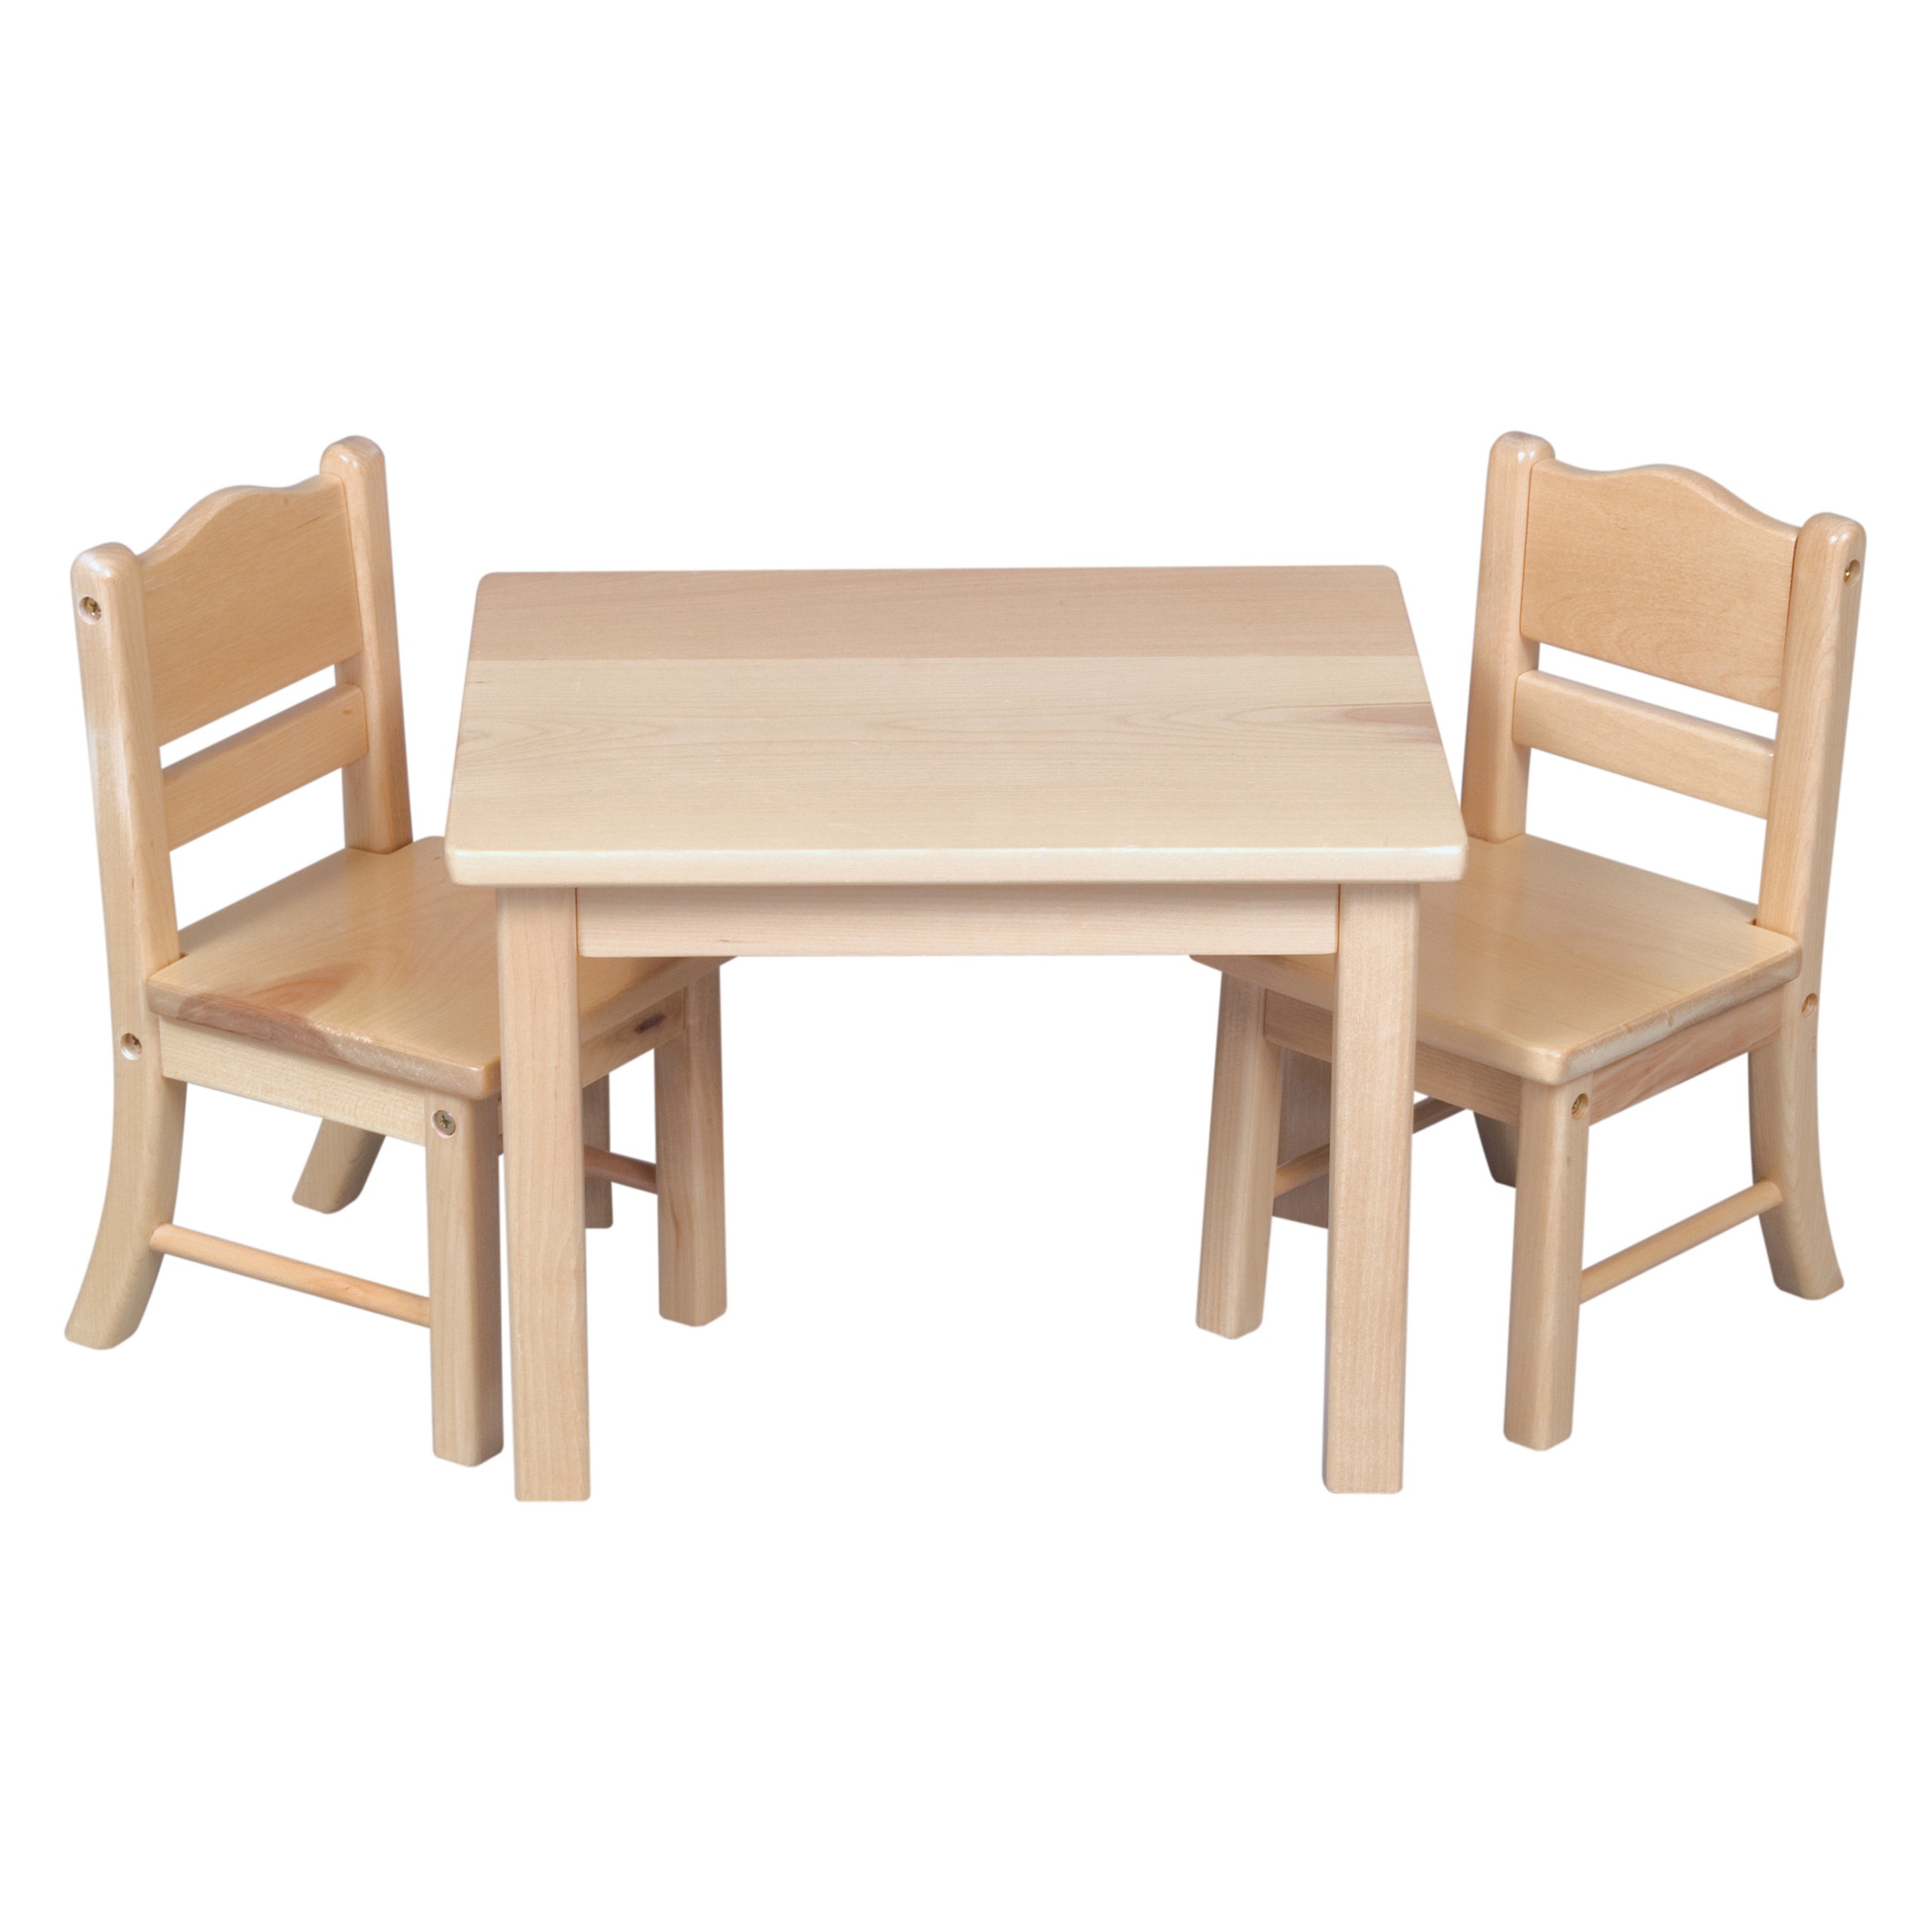 Guidecraft doll table and chair set natural baby doll